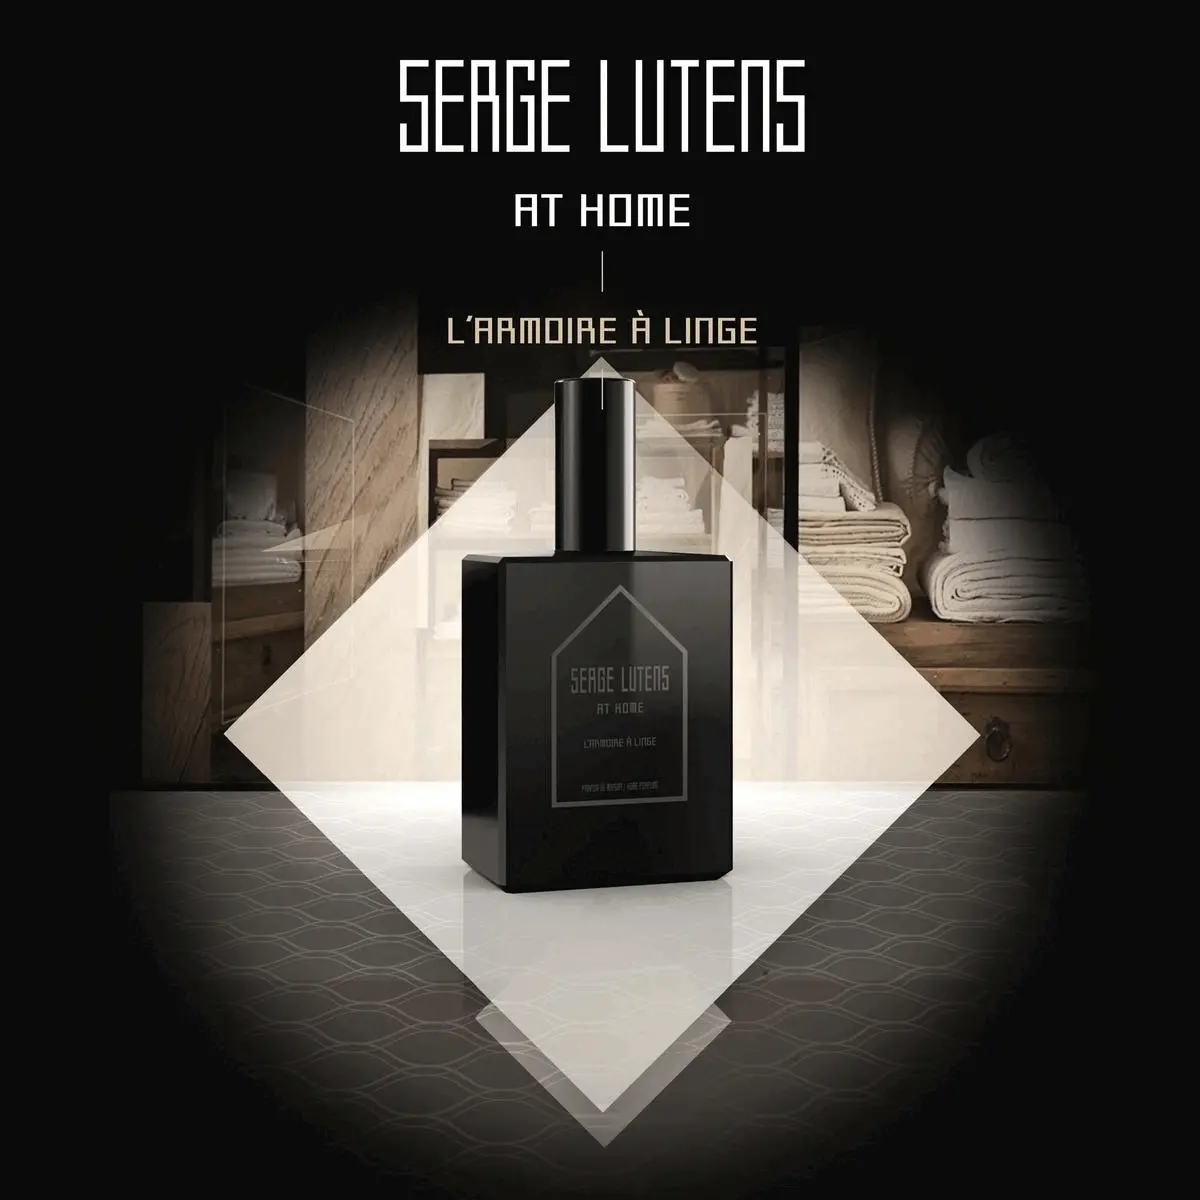 Image 1 and 2, serge lutens at home, l'armoire a linge